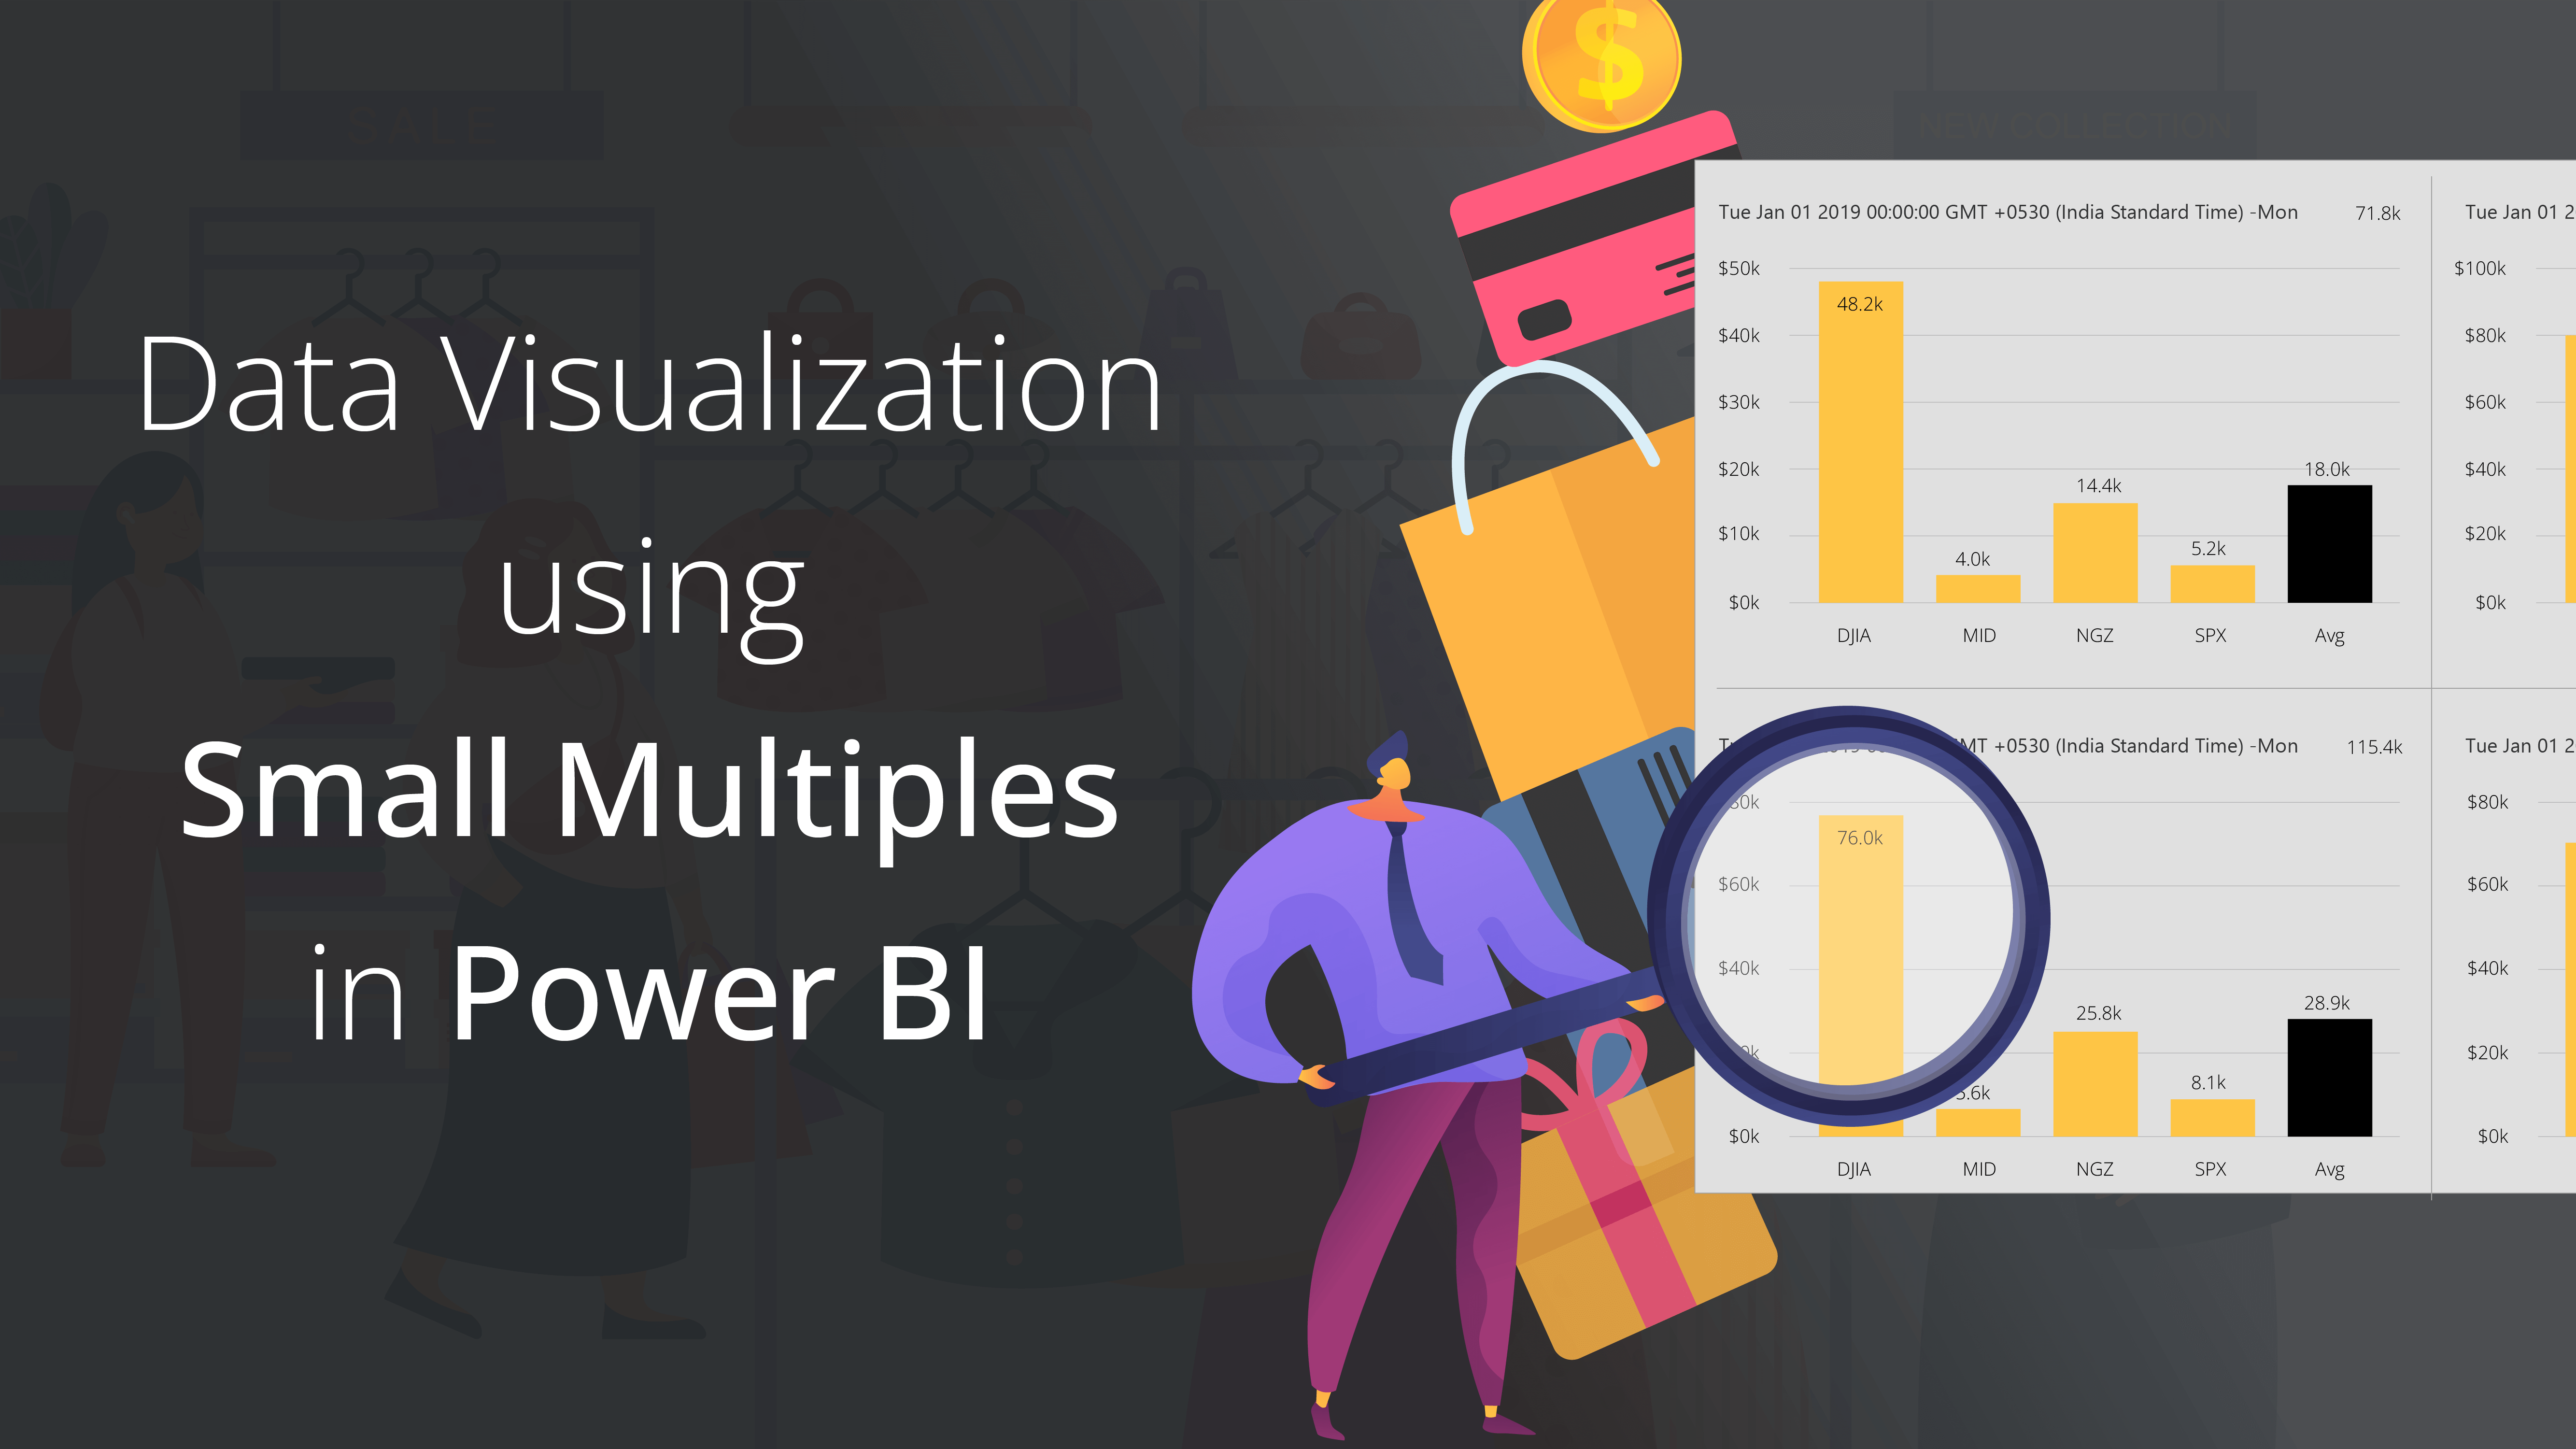 Data Visualization using Small Multiples in Power BI